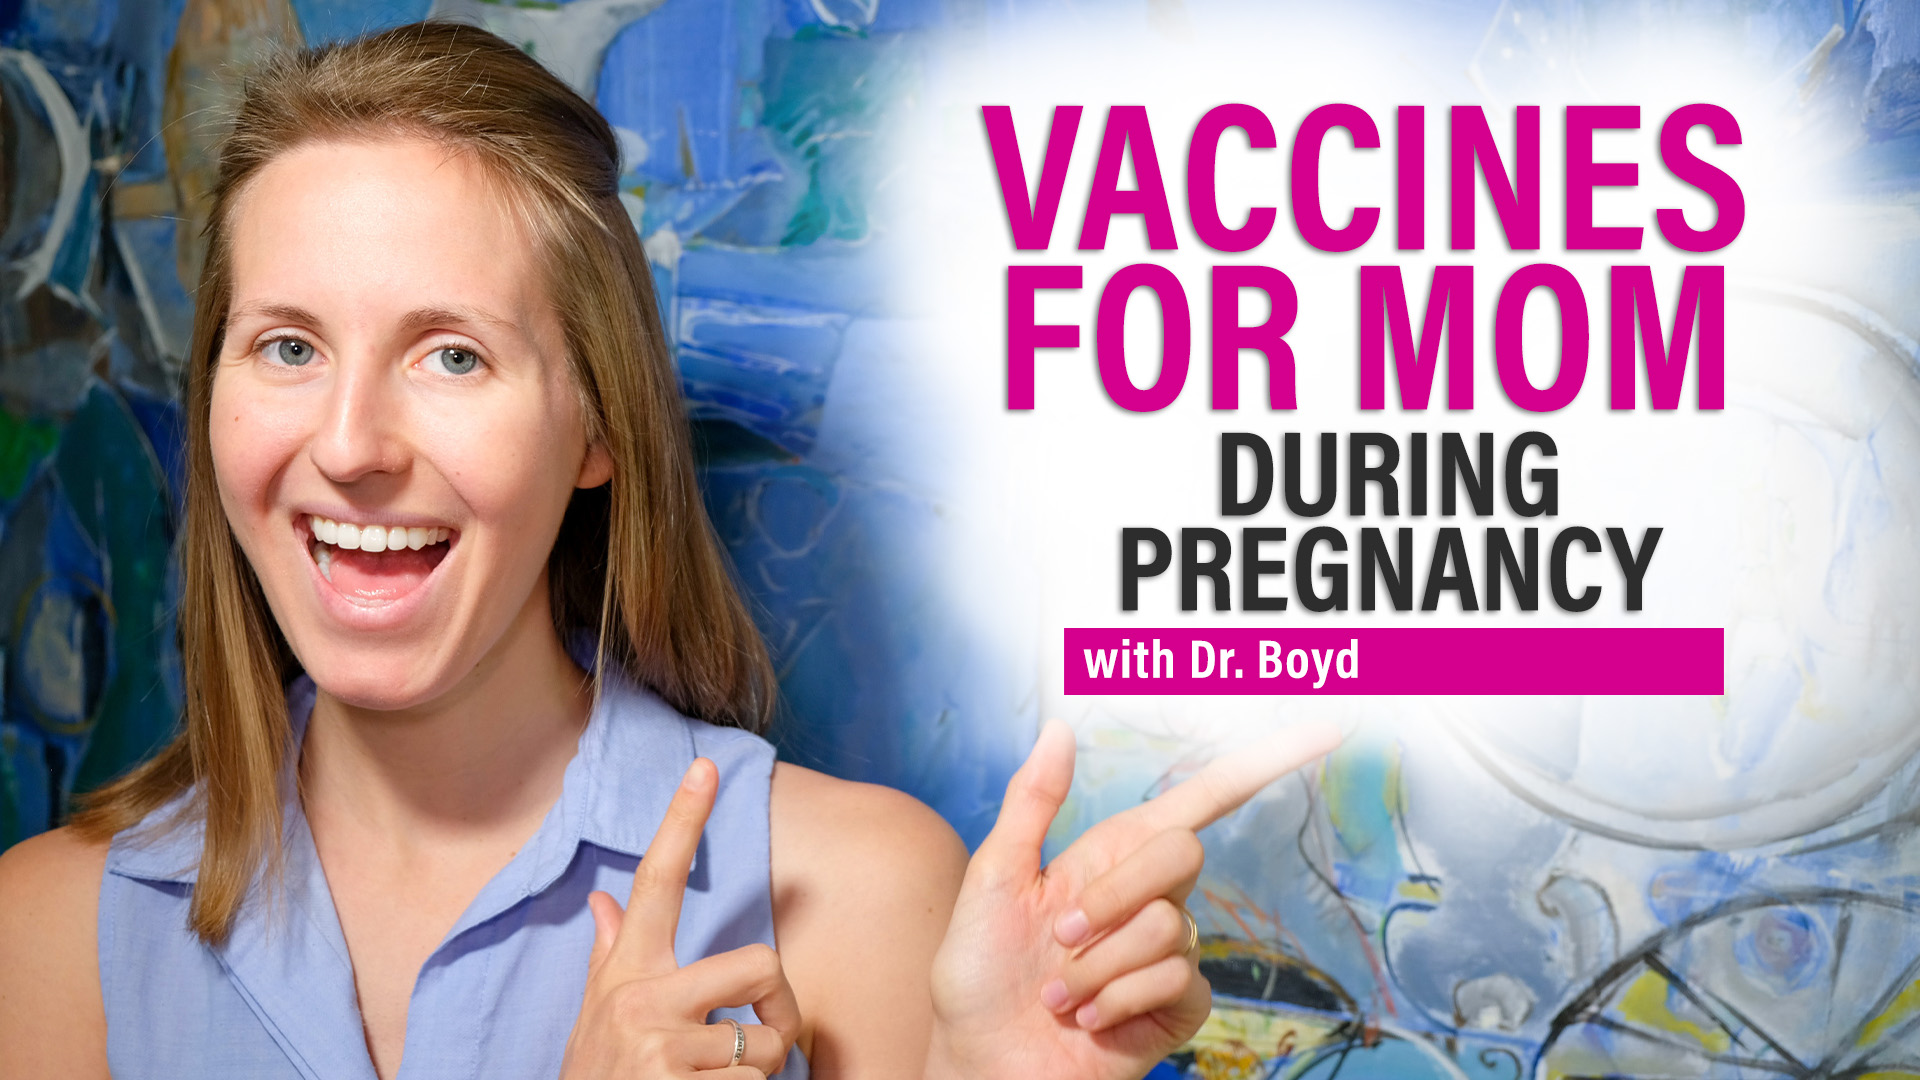 Vaccines for Mom in Pregnancy - What Vaccines are Safe During Pregnancy?